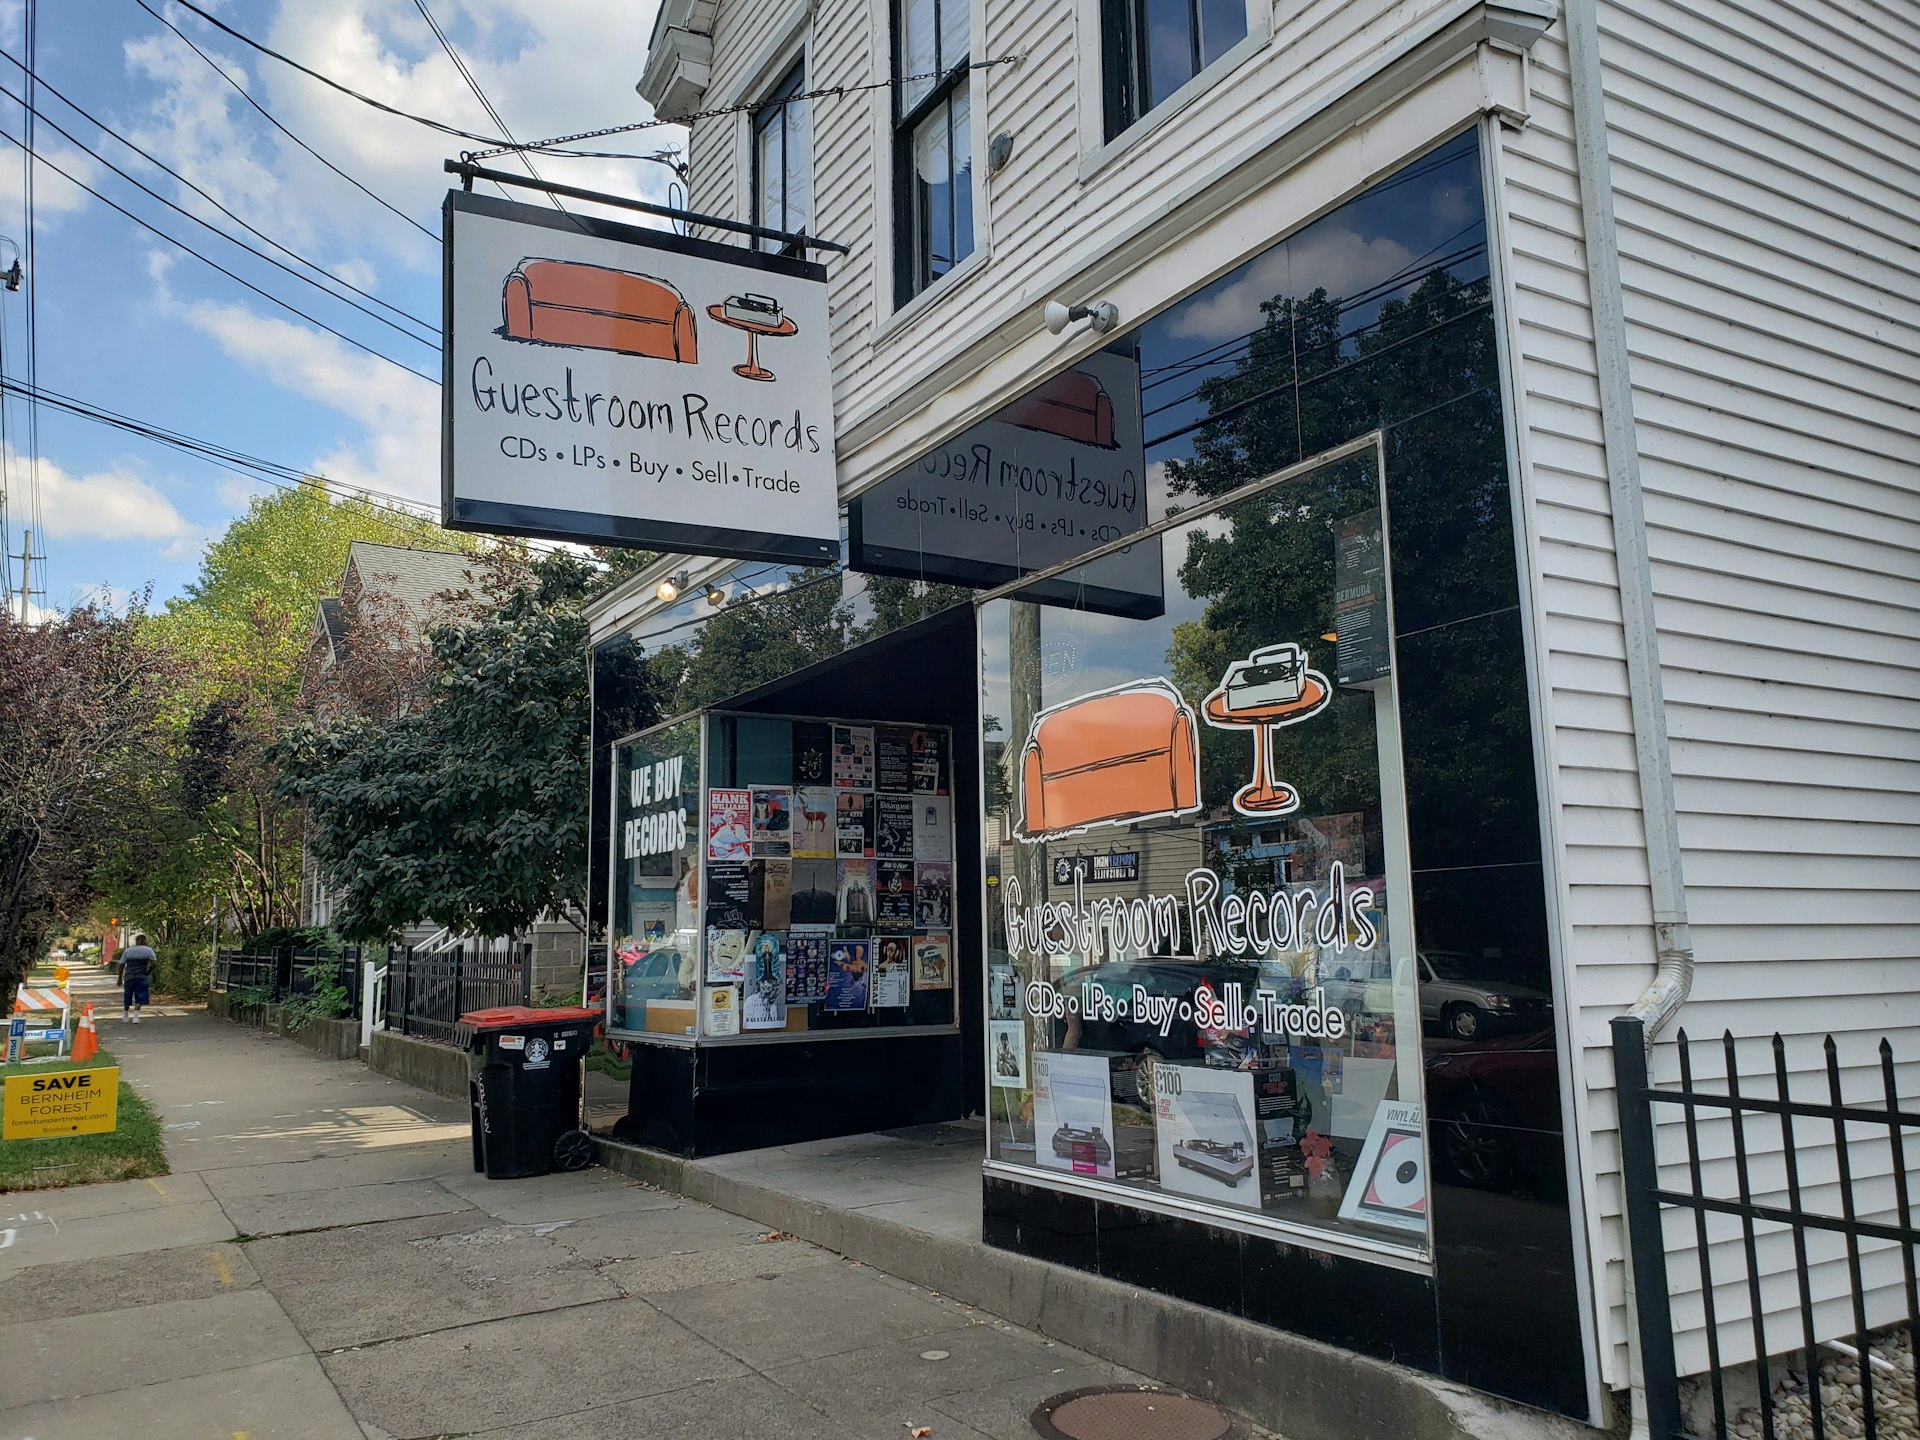 The exterior of Guestroom Records in Louisville, Kentucky is a two-story building with white clapboard siding. The storefront consists of two plate-glass windows on either side of a doorway, filled with colorful event posters and a large cartoony logo of an orange couch, an orange side table, with a record player on top. The concrete sidewalk extends to the left, showing a pretty tree-lined street and a pedestrian. 